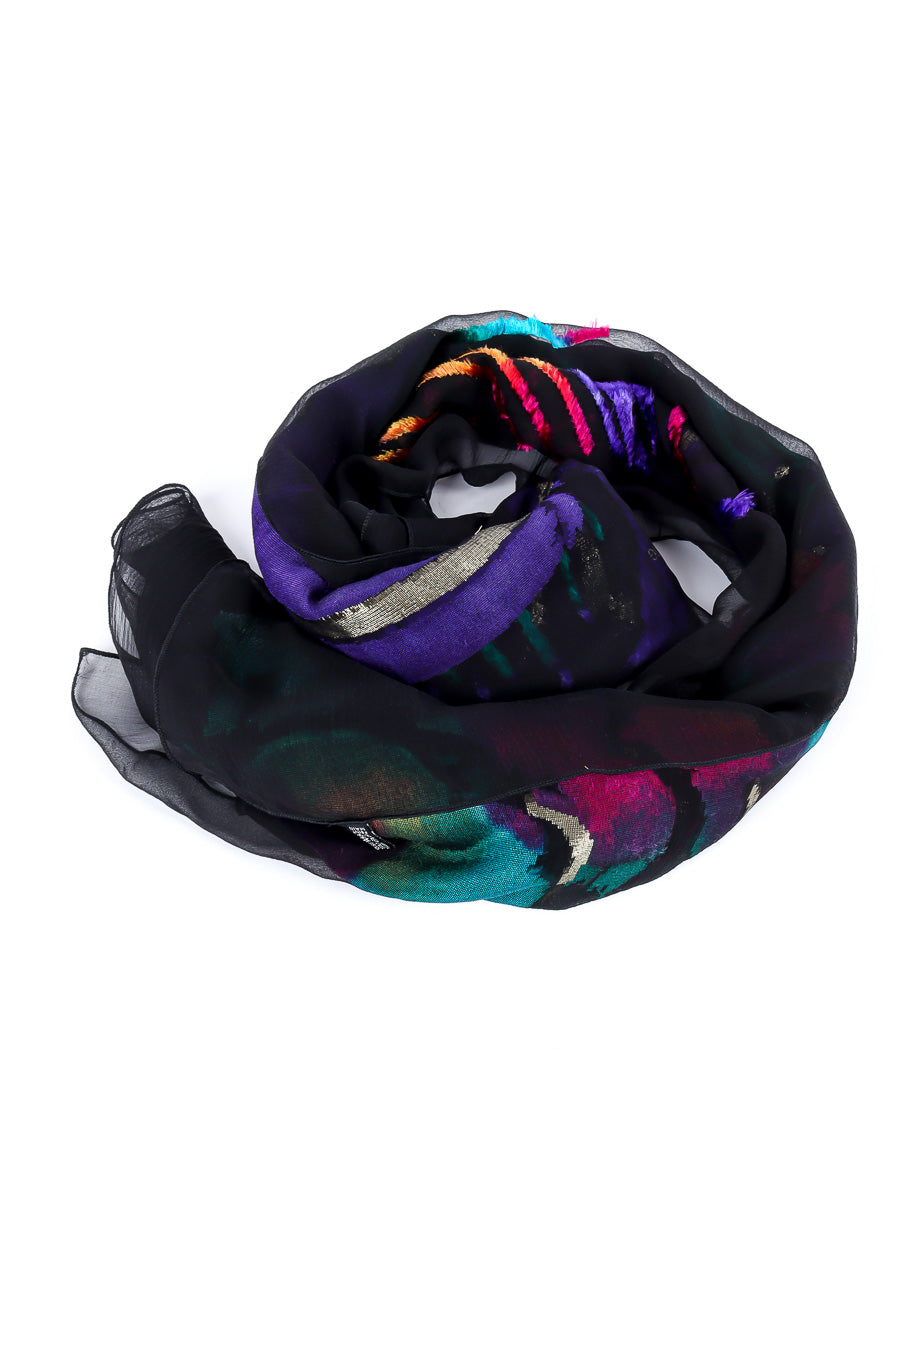 Jewel tone velvet scarf by Paco Rabanne flat lay rolled in a circle @recessla